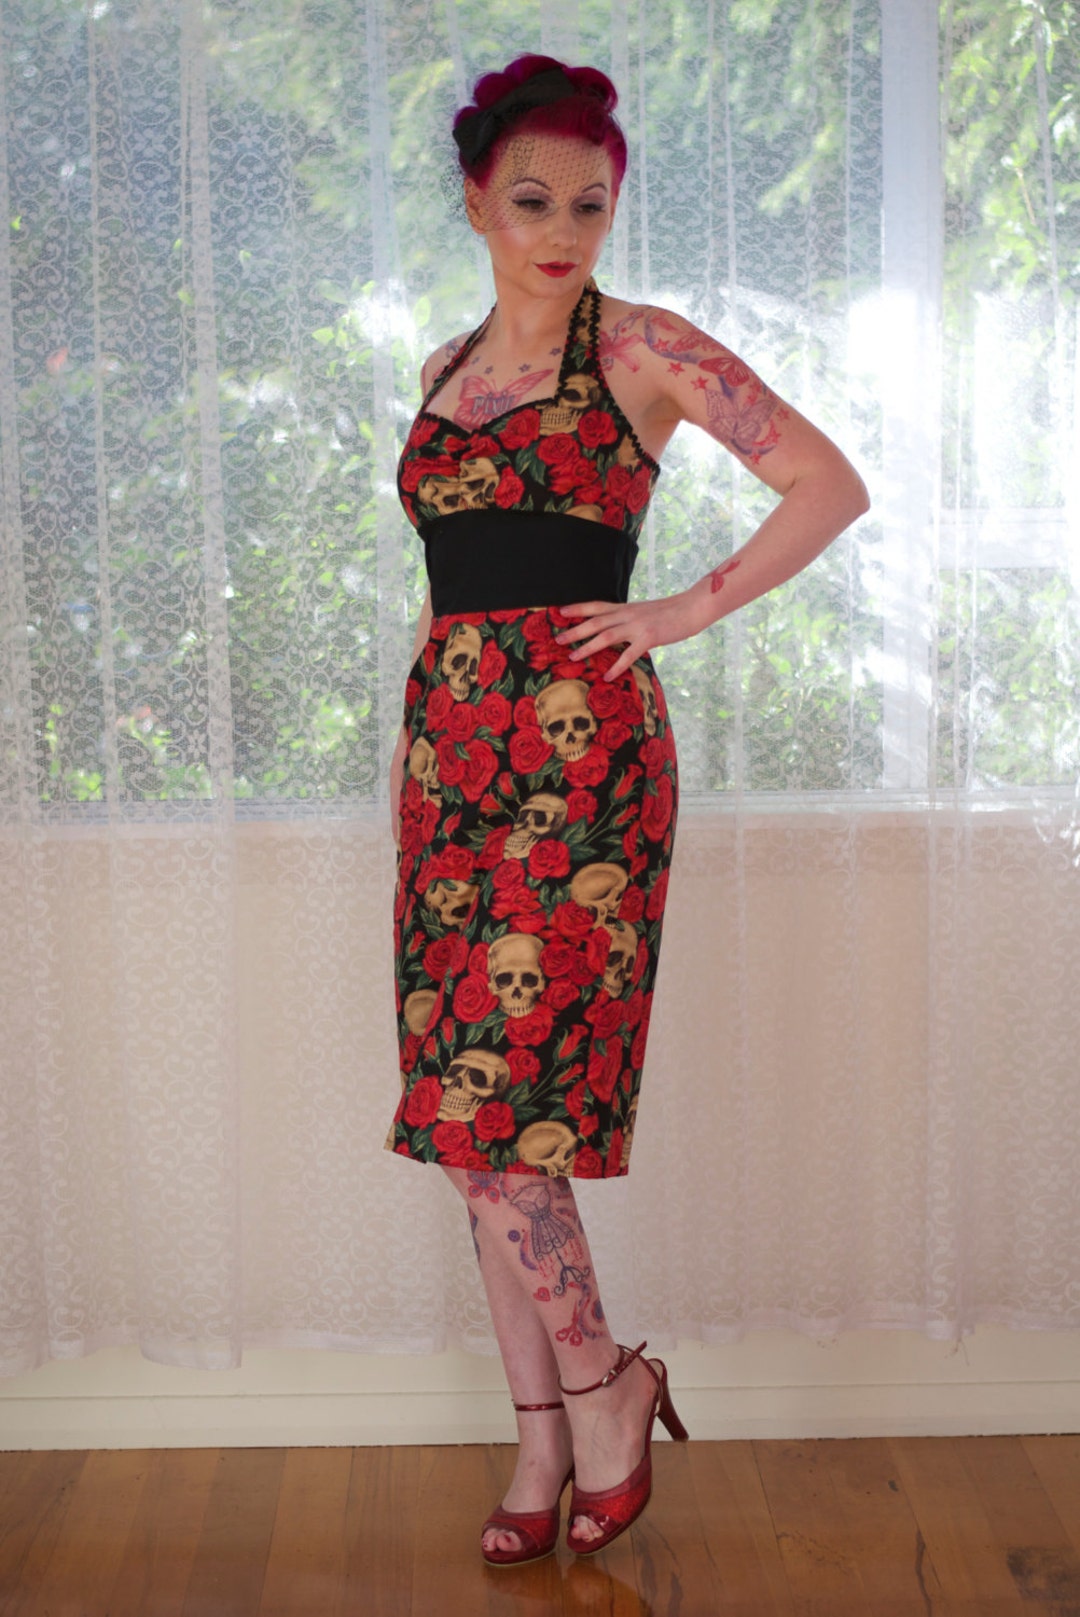 pinup girl clothing red wiggle dress rockabilly